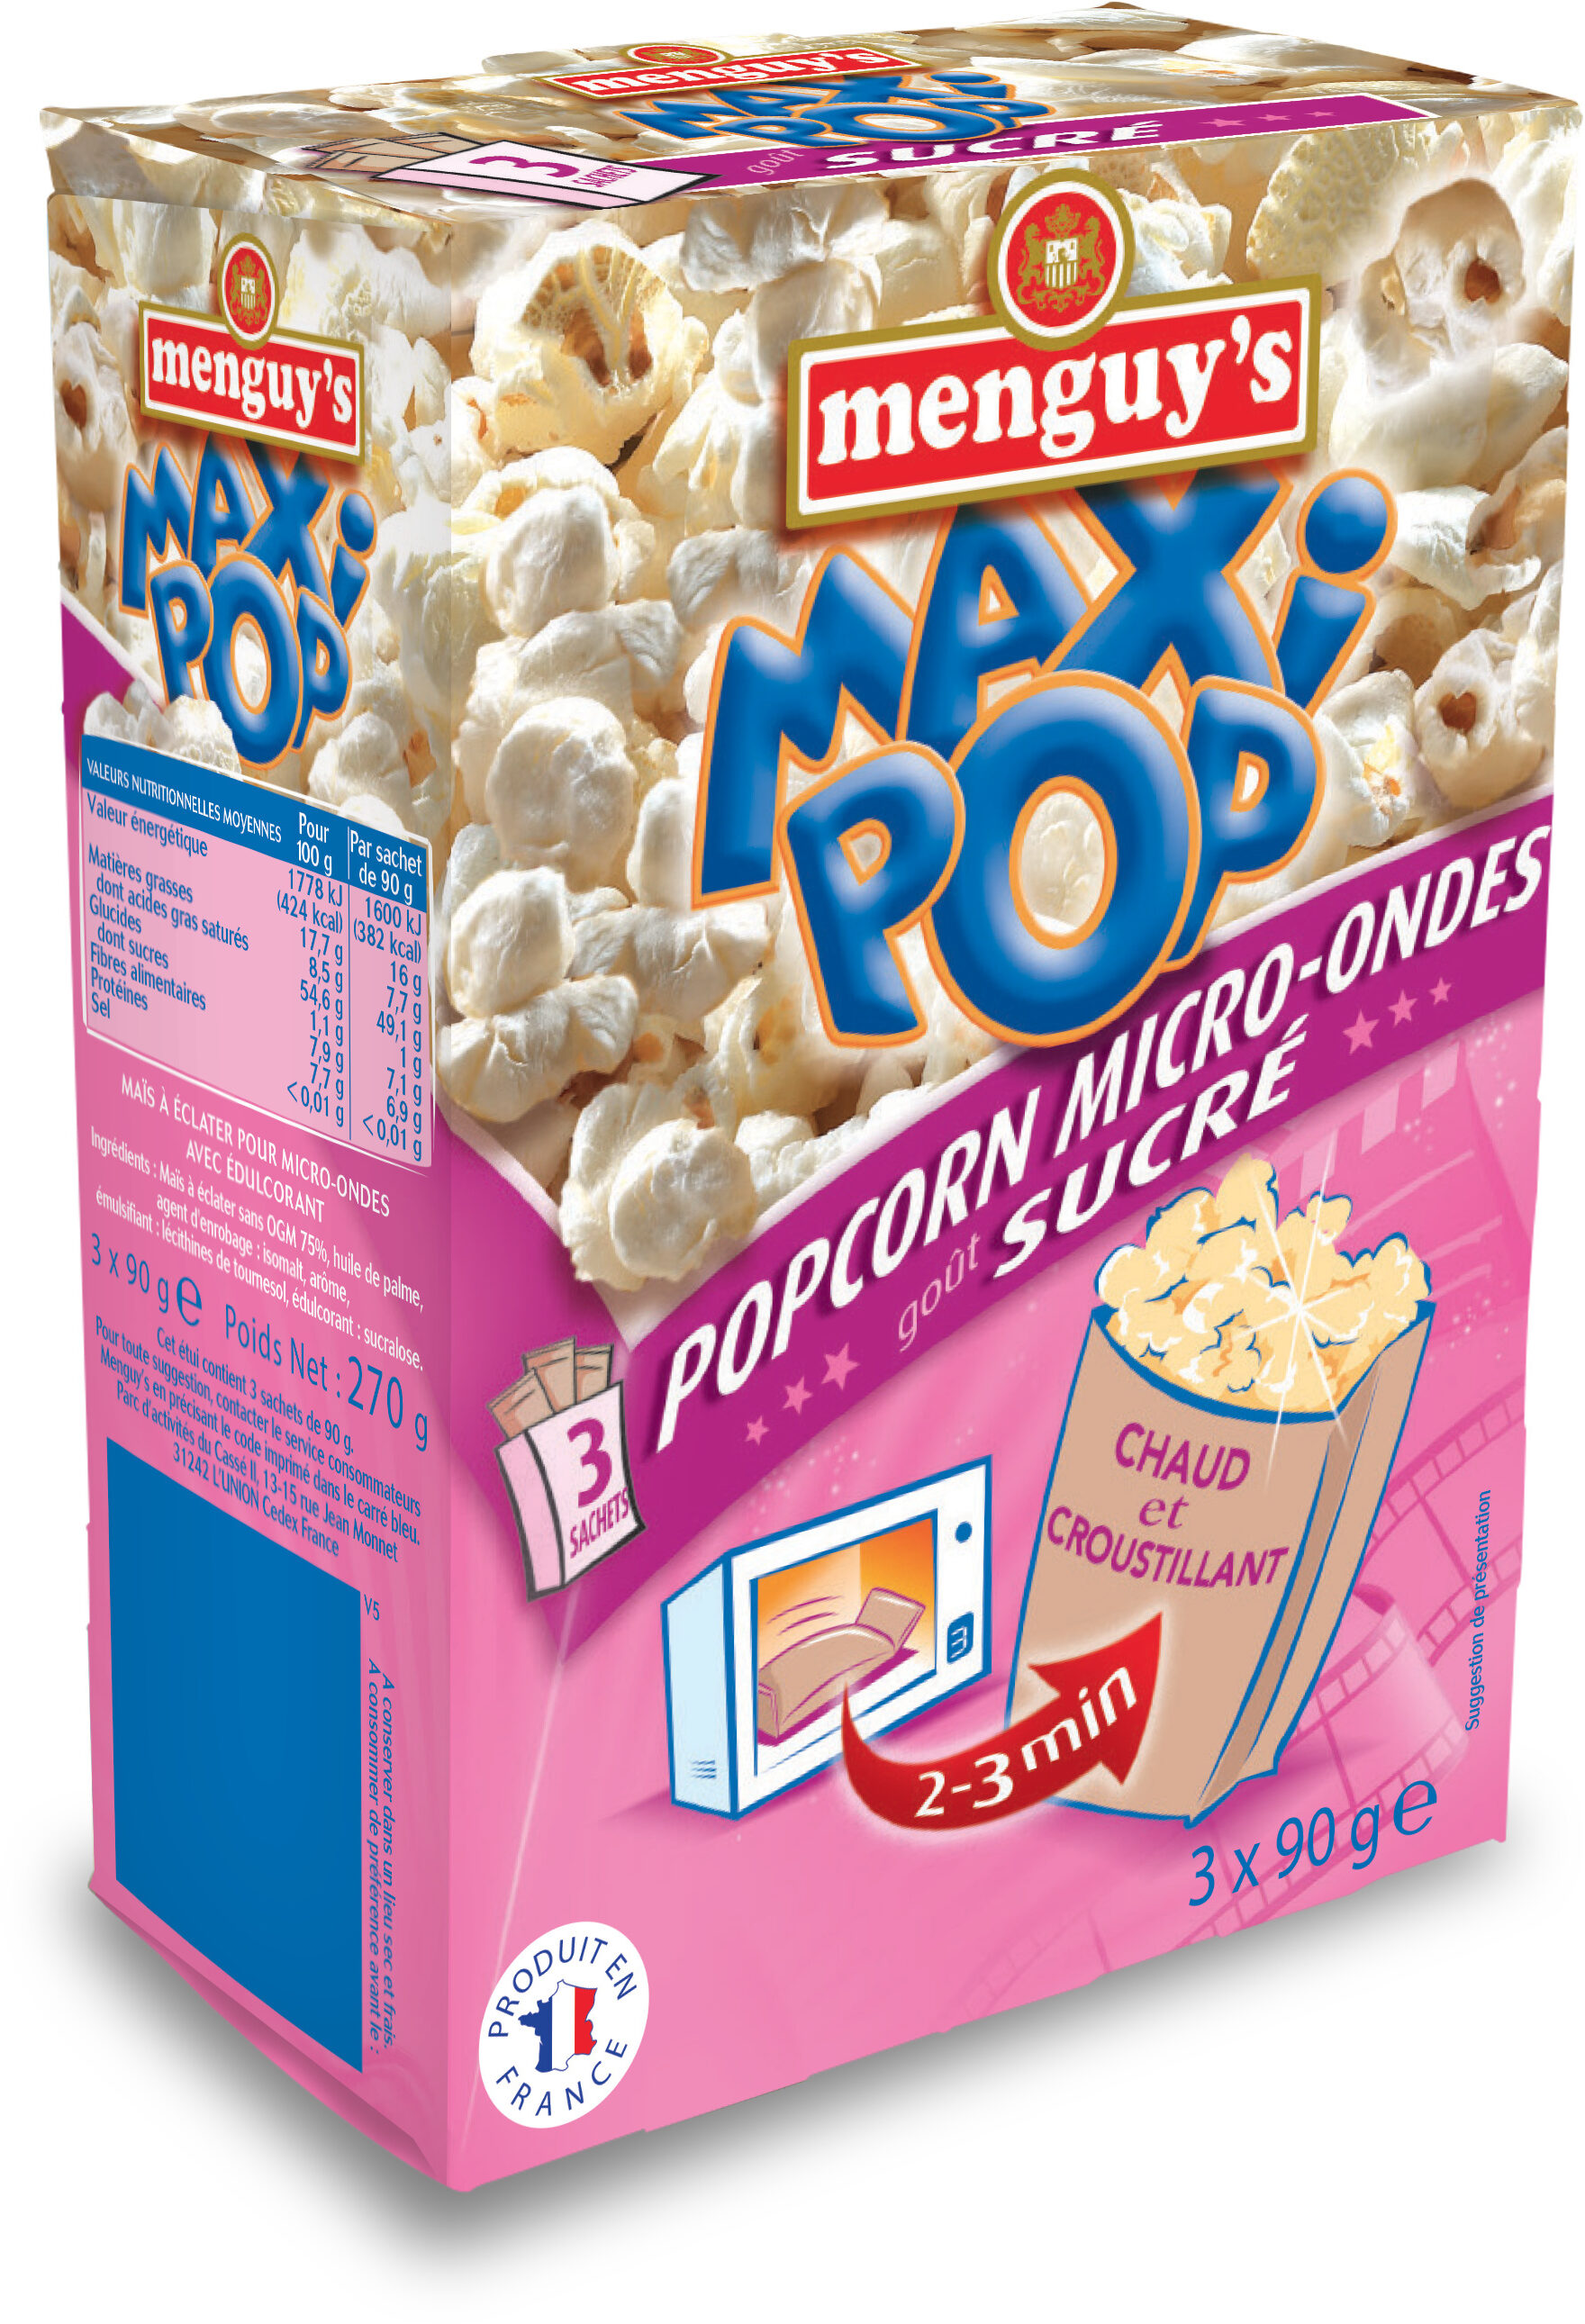 Pop corn micro-ondes sucre 3x90g - Product - fr